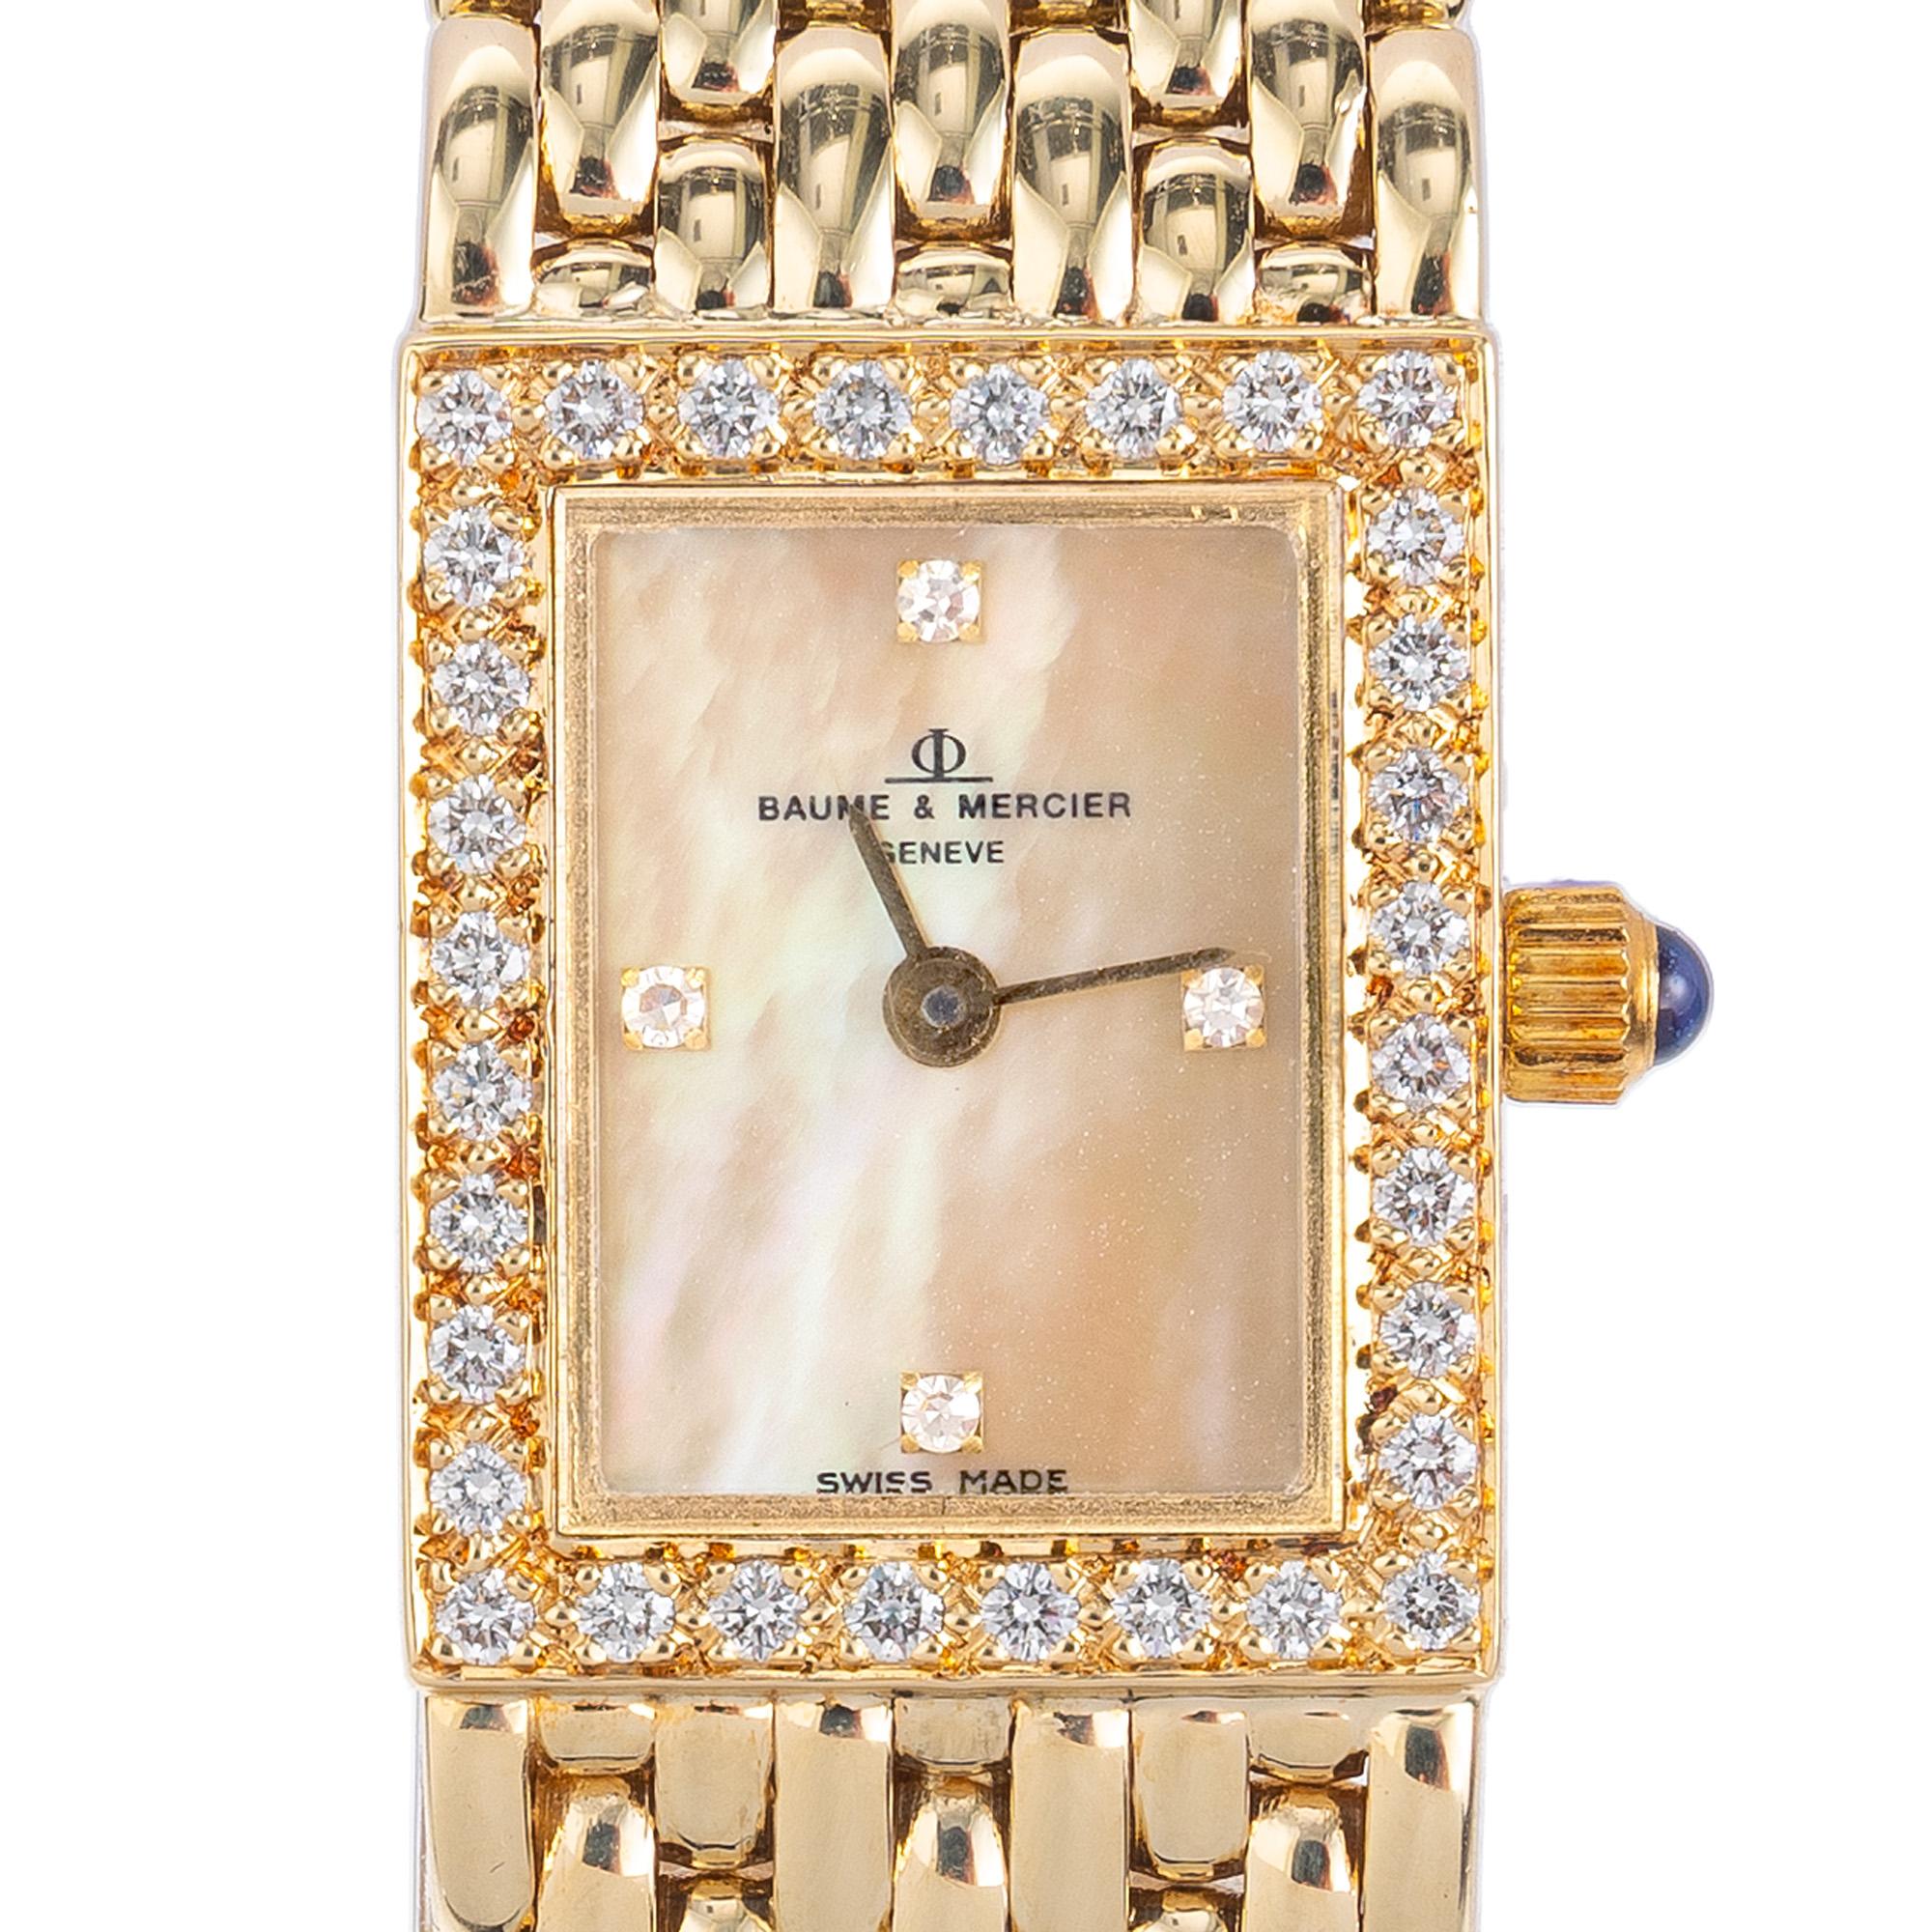 This is an elegant 14k yellow gold Baume and Mercier ladies wristwatch with a 32 round bright white diamond bezel, 4 single cut diamond mother of pearl diamond dial, mesh bracelet, and quartz movement. This is a statement timepiece that has a